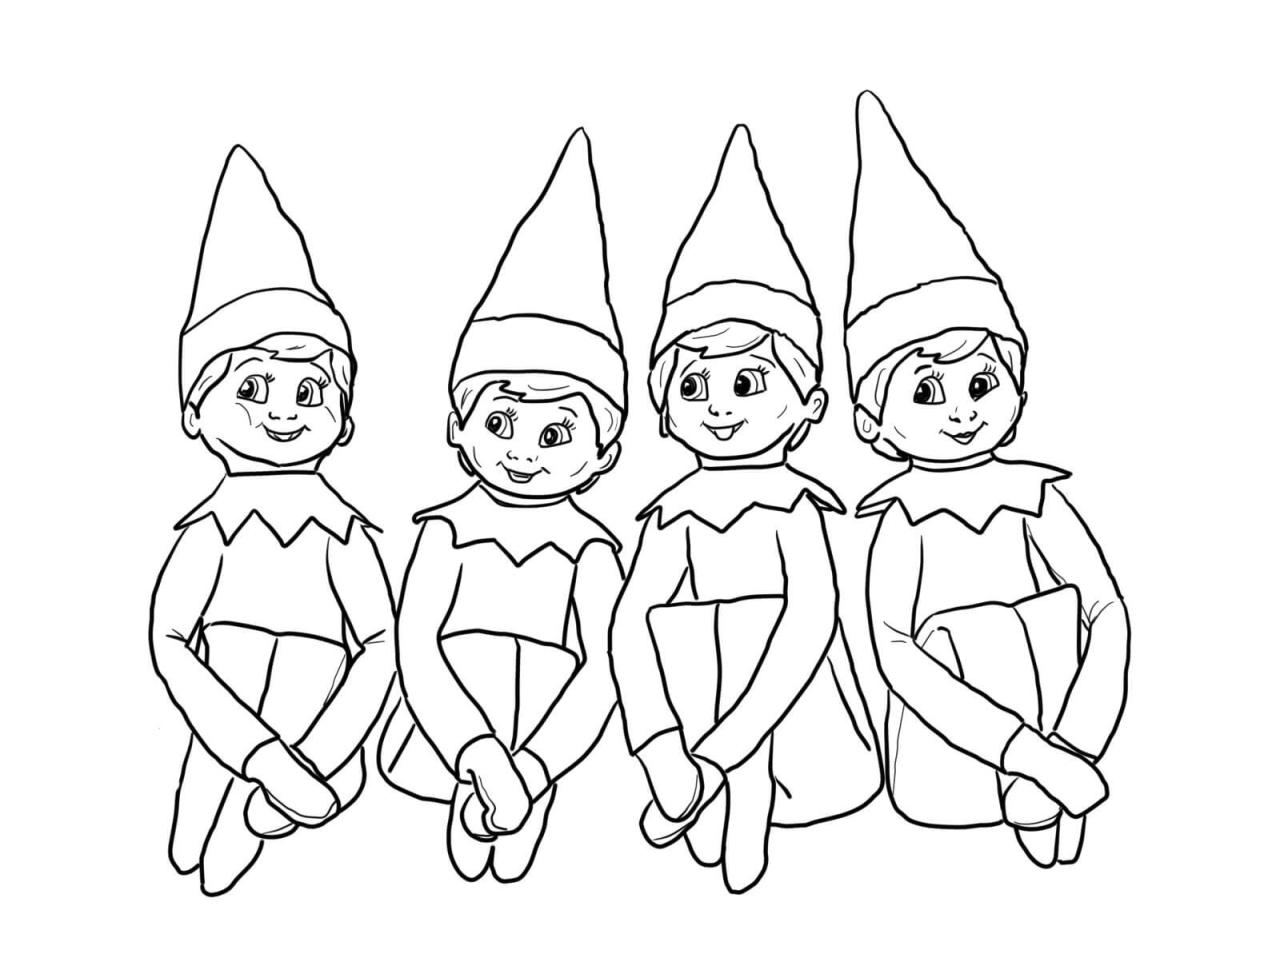 Elves On The Shelf Coloring Page Free Printable Coloring Pages for Kids